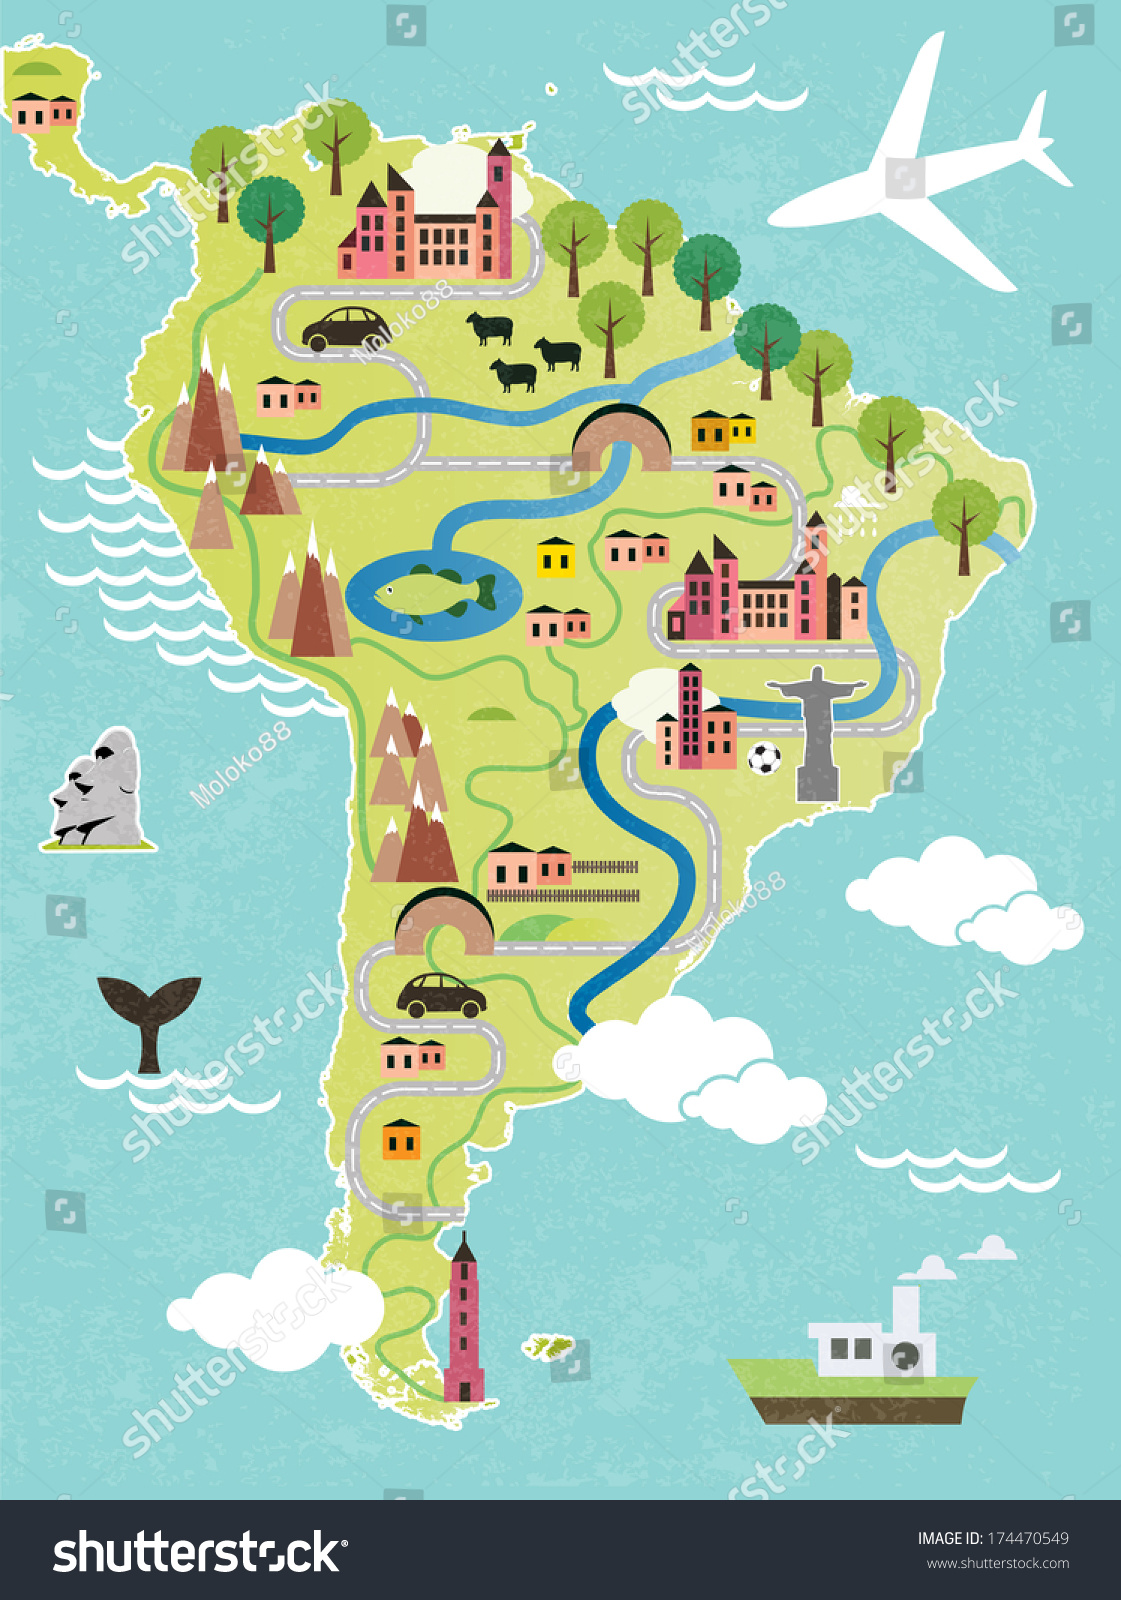 south america map clipart - photo #17